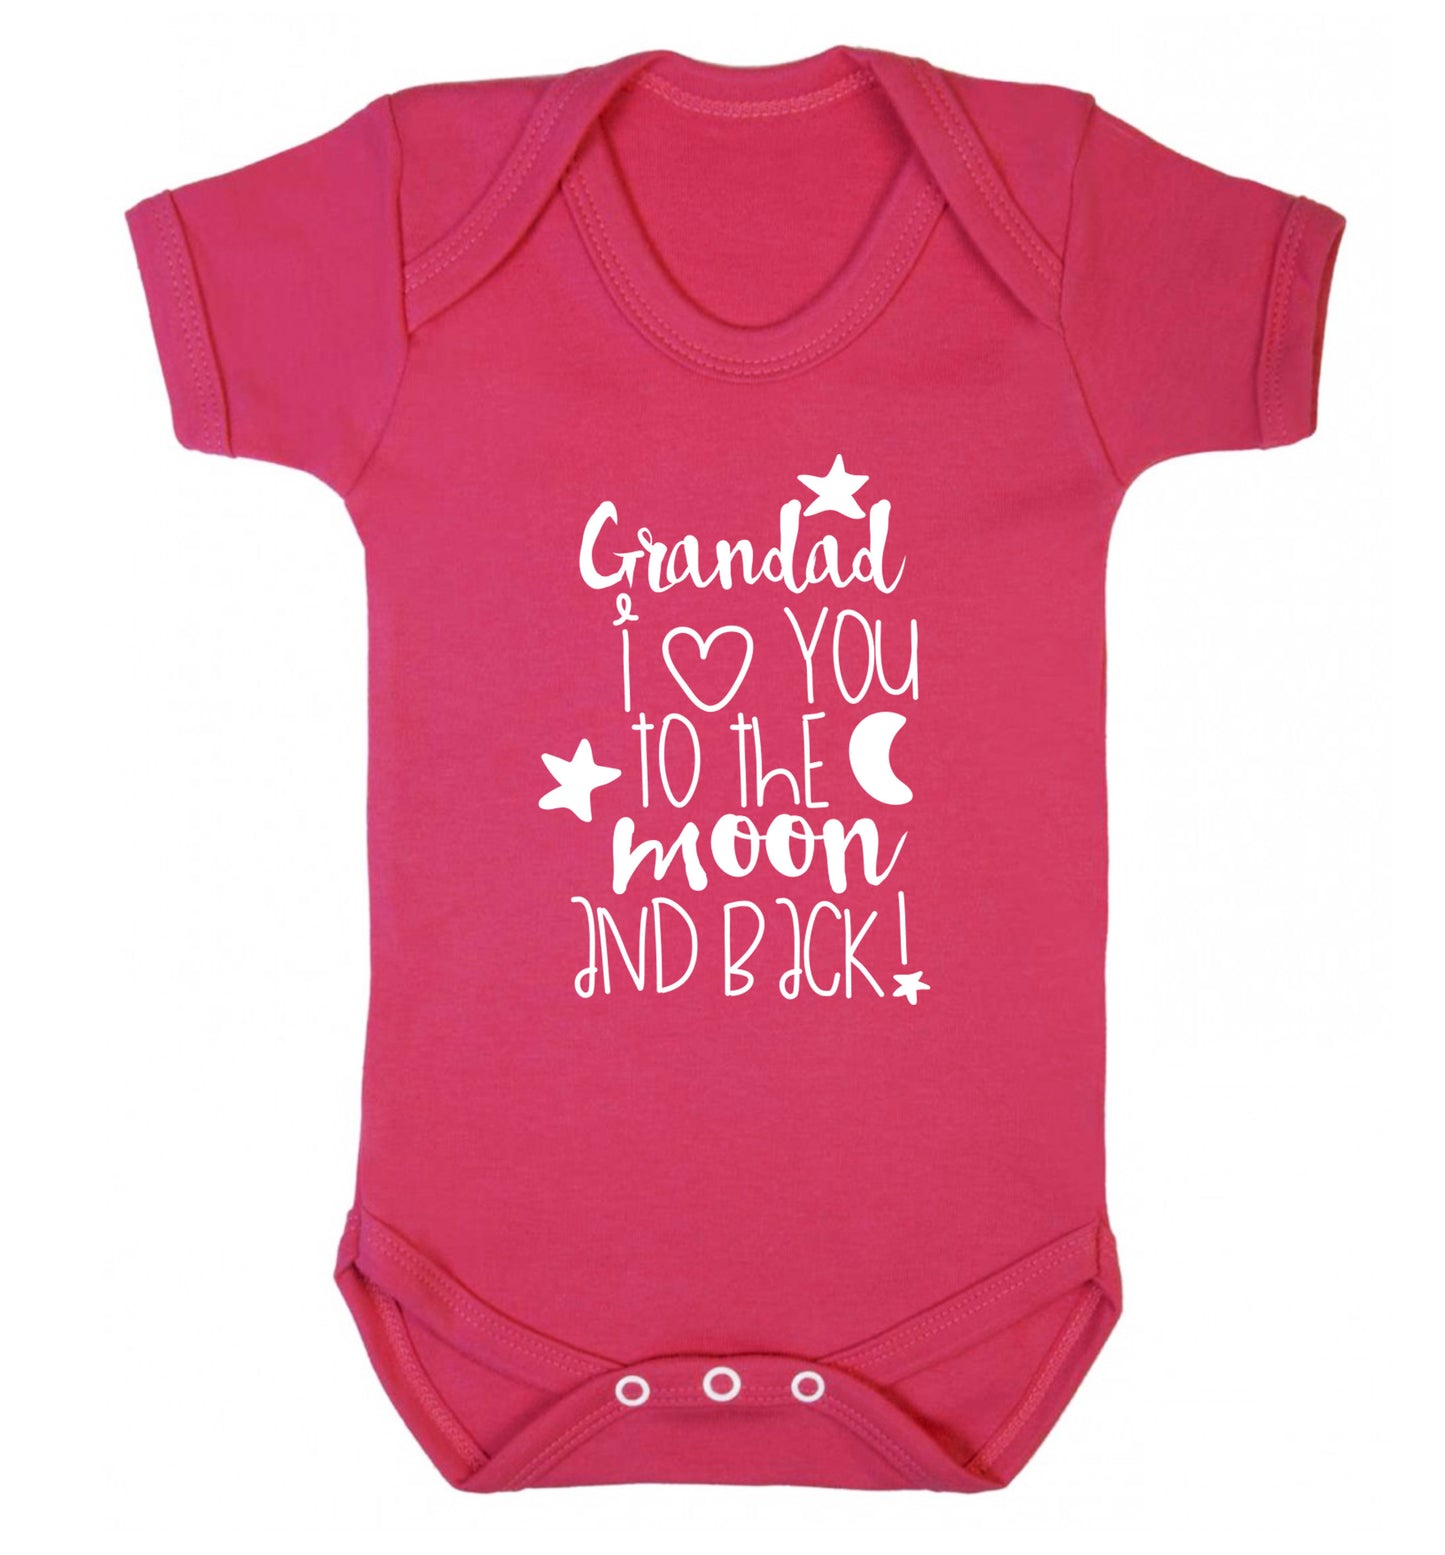 Grandad's I love you to the moon and back Baby Vest dark pink 18-24 months